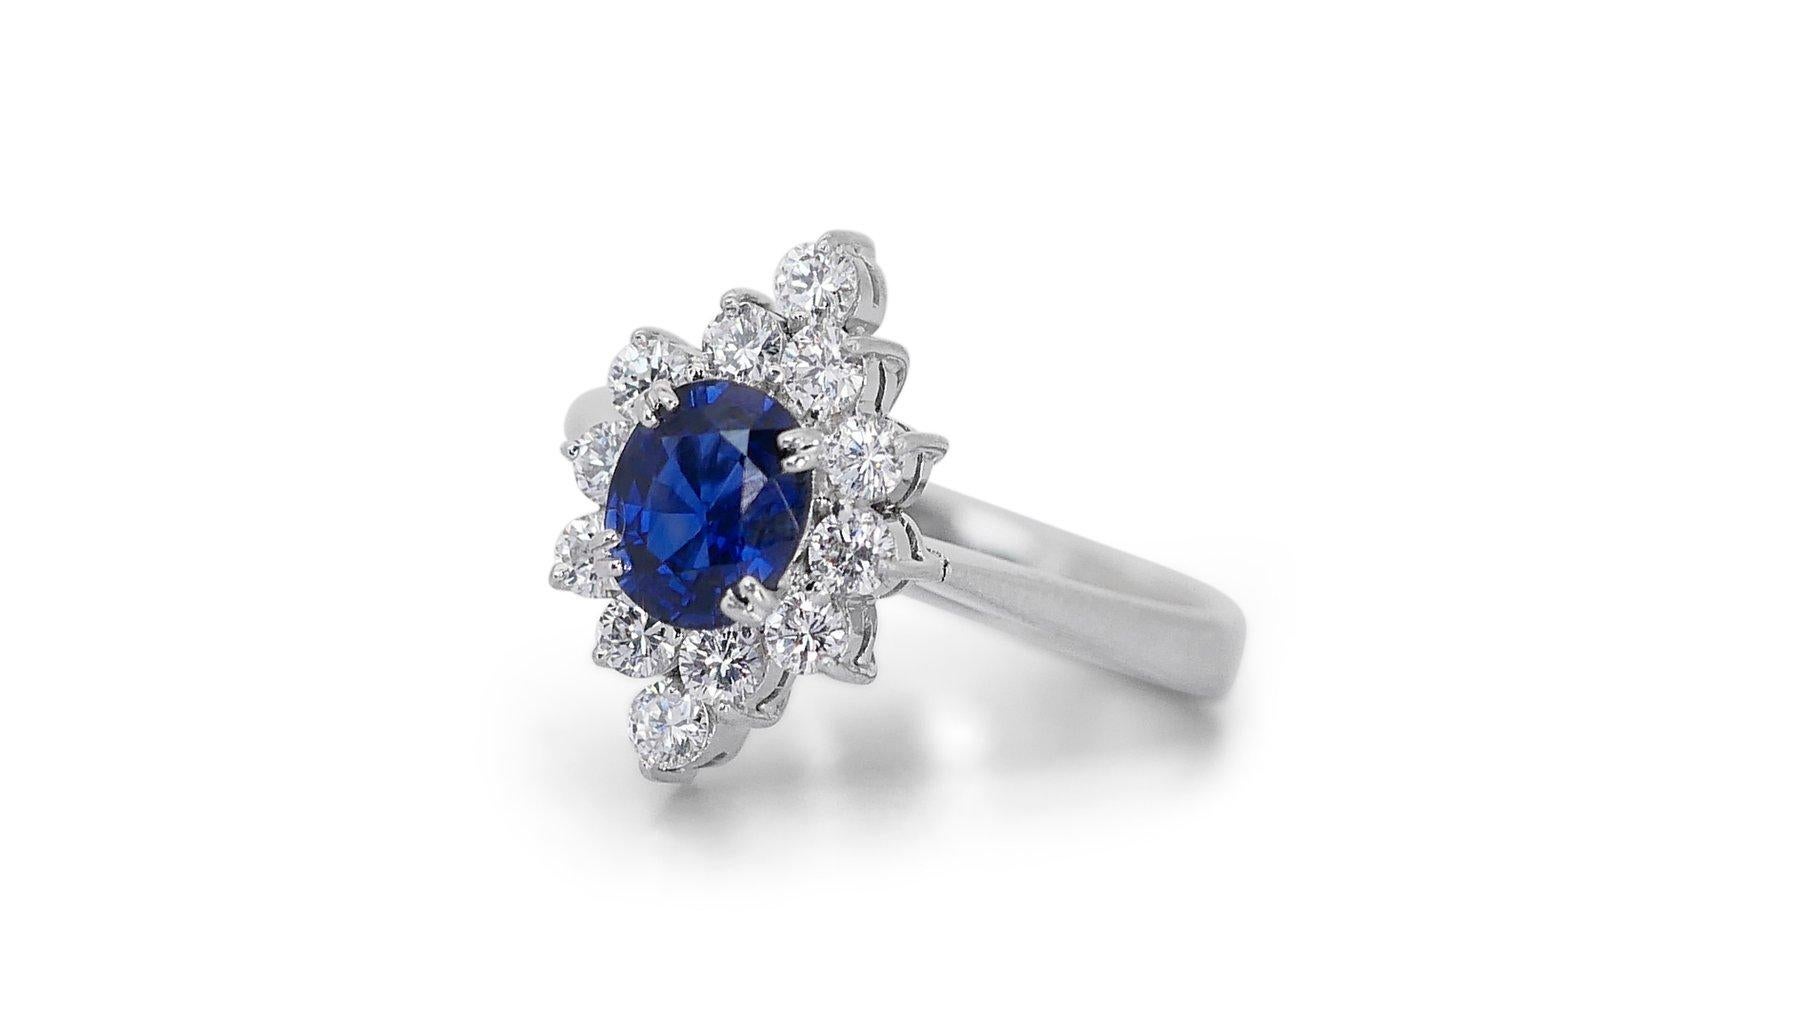 Women's Lovely 1.37 carat oval natural sapphire ring in 18K white gold